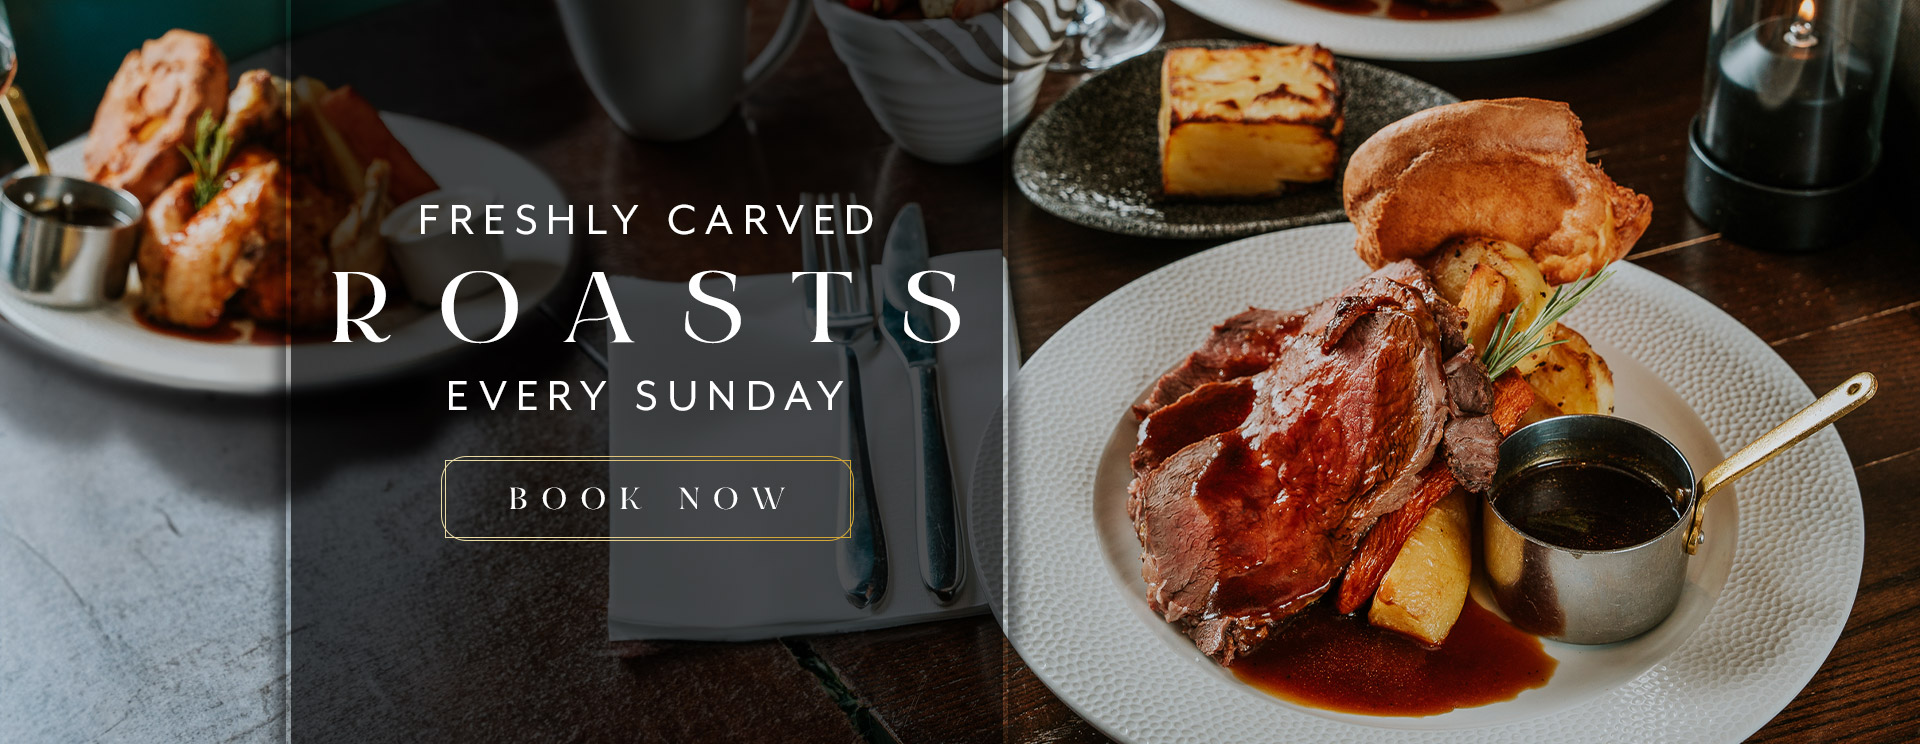 Sunday Lunch at The King's Arms